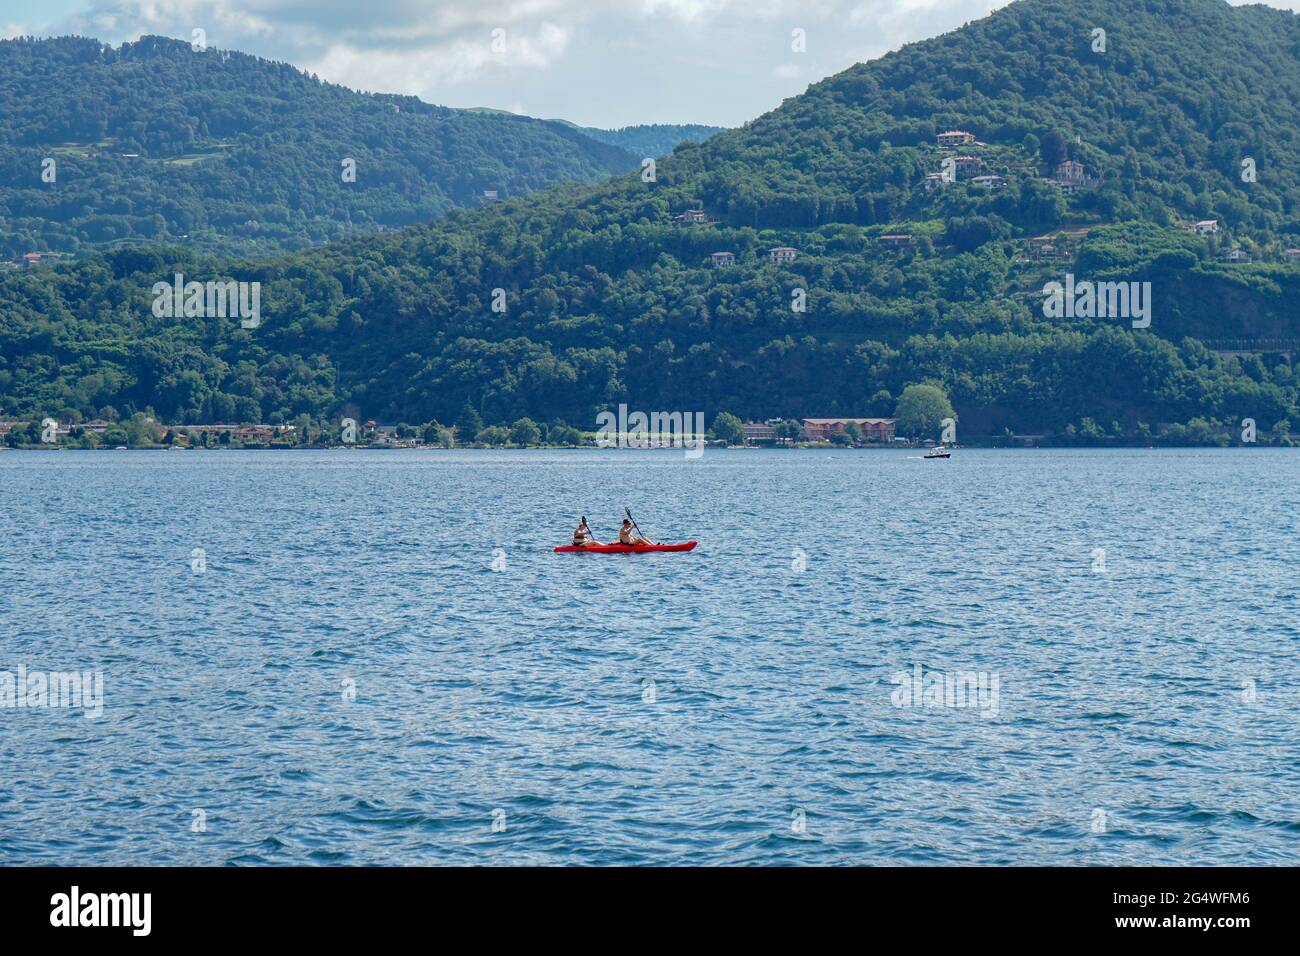 Pella - 07/12/2020: couple on a red canoe in Orta's lake Stock Photo